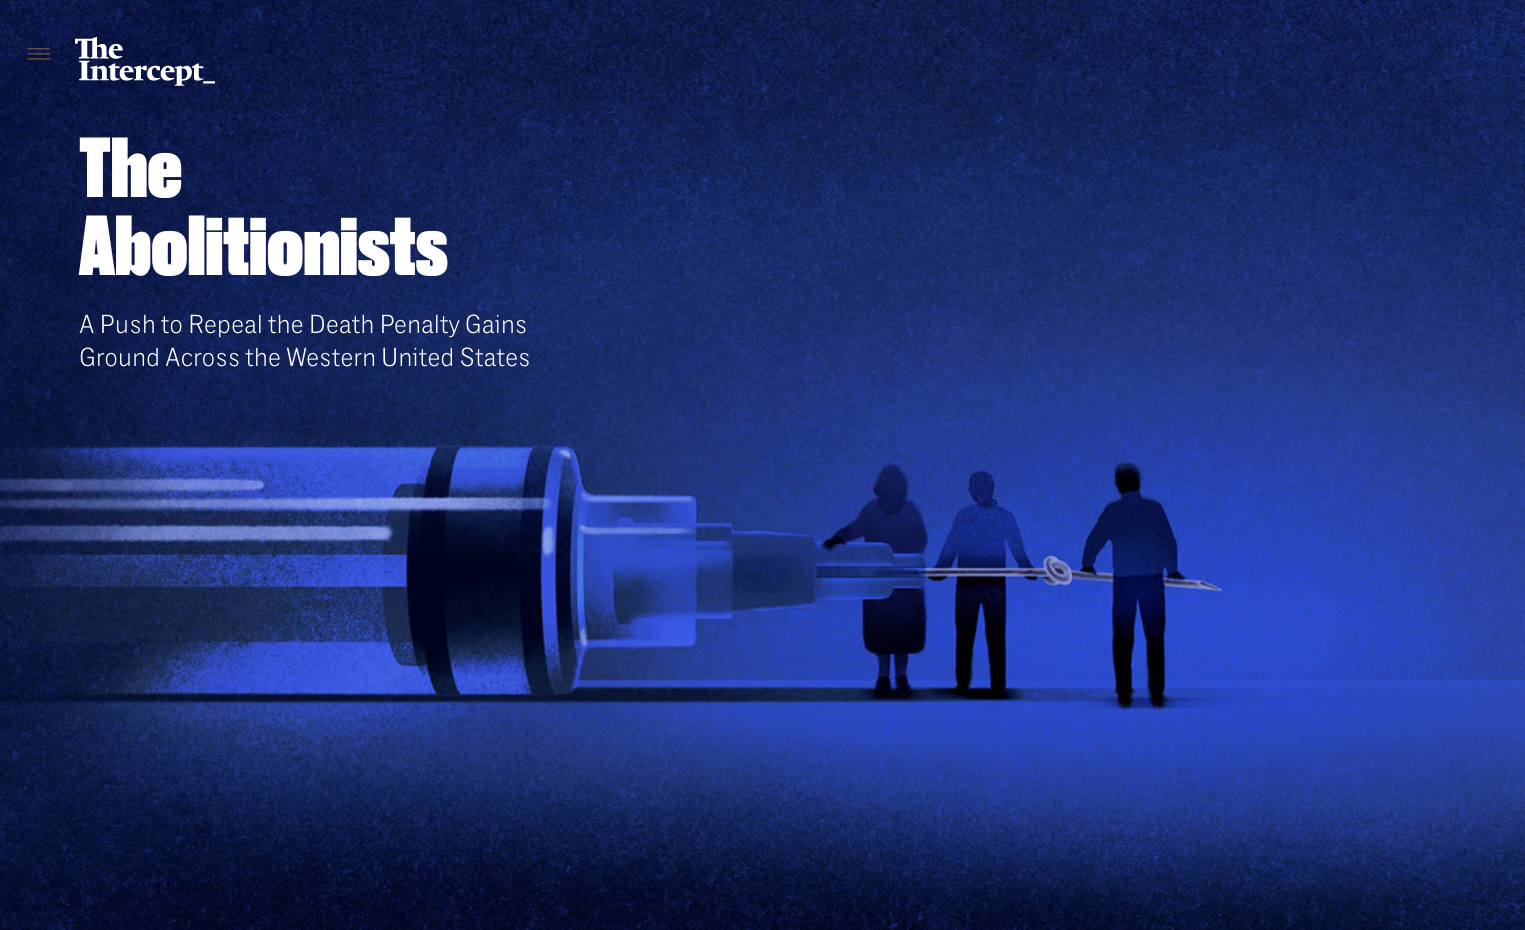  Illustration: Karolis Strautniekas  Art Direction: Ariel Zambelich + Philipp Hubert  Story:  A Push to Repeal the Death Penalty Gains Ground Across the Western United States  